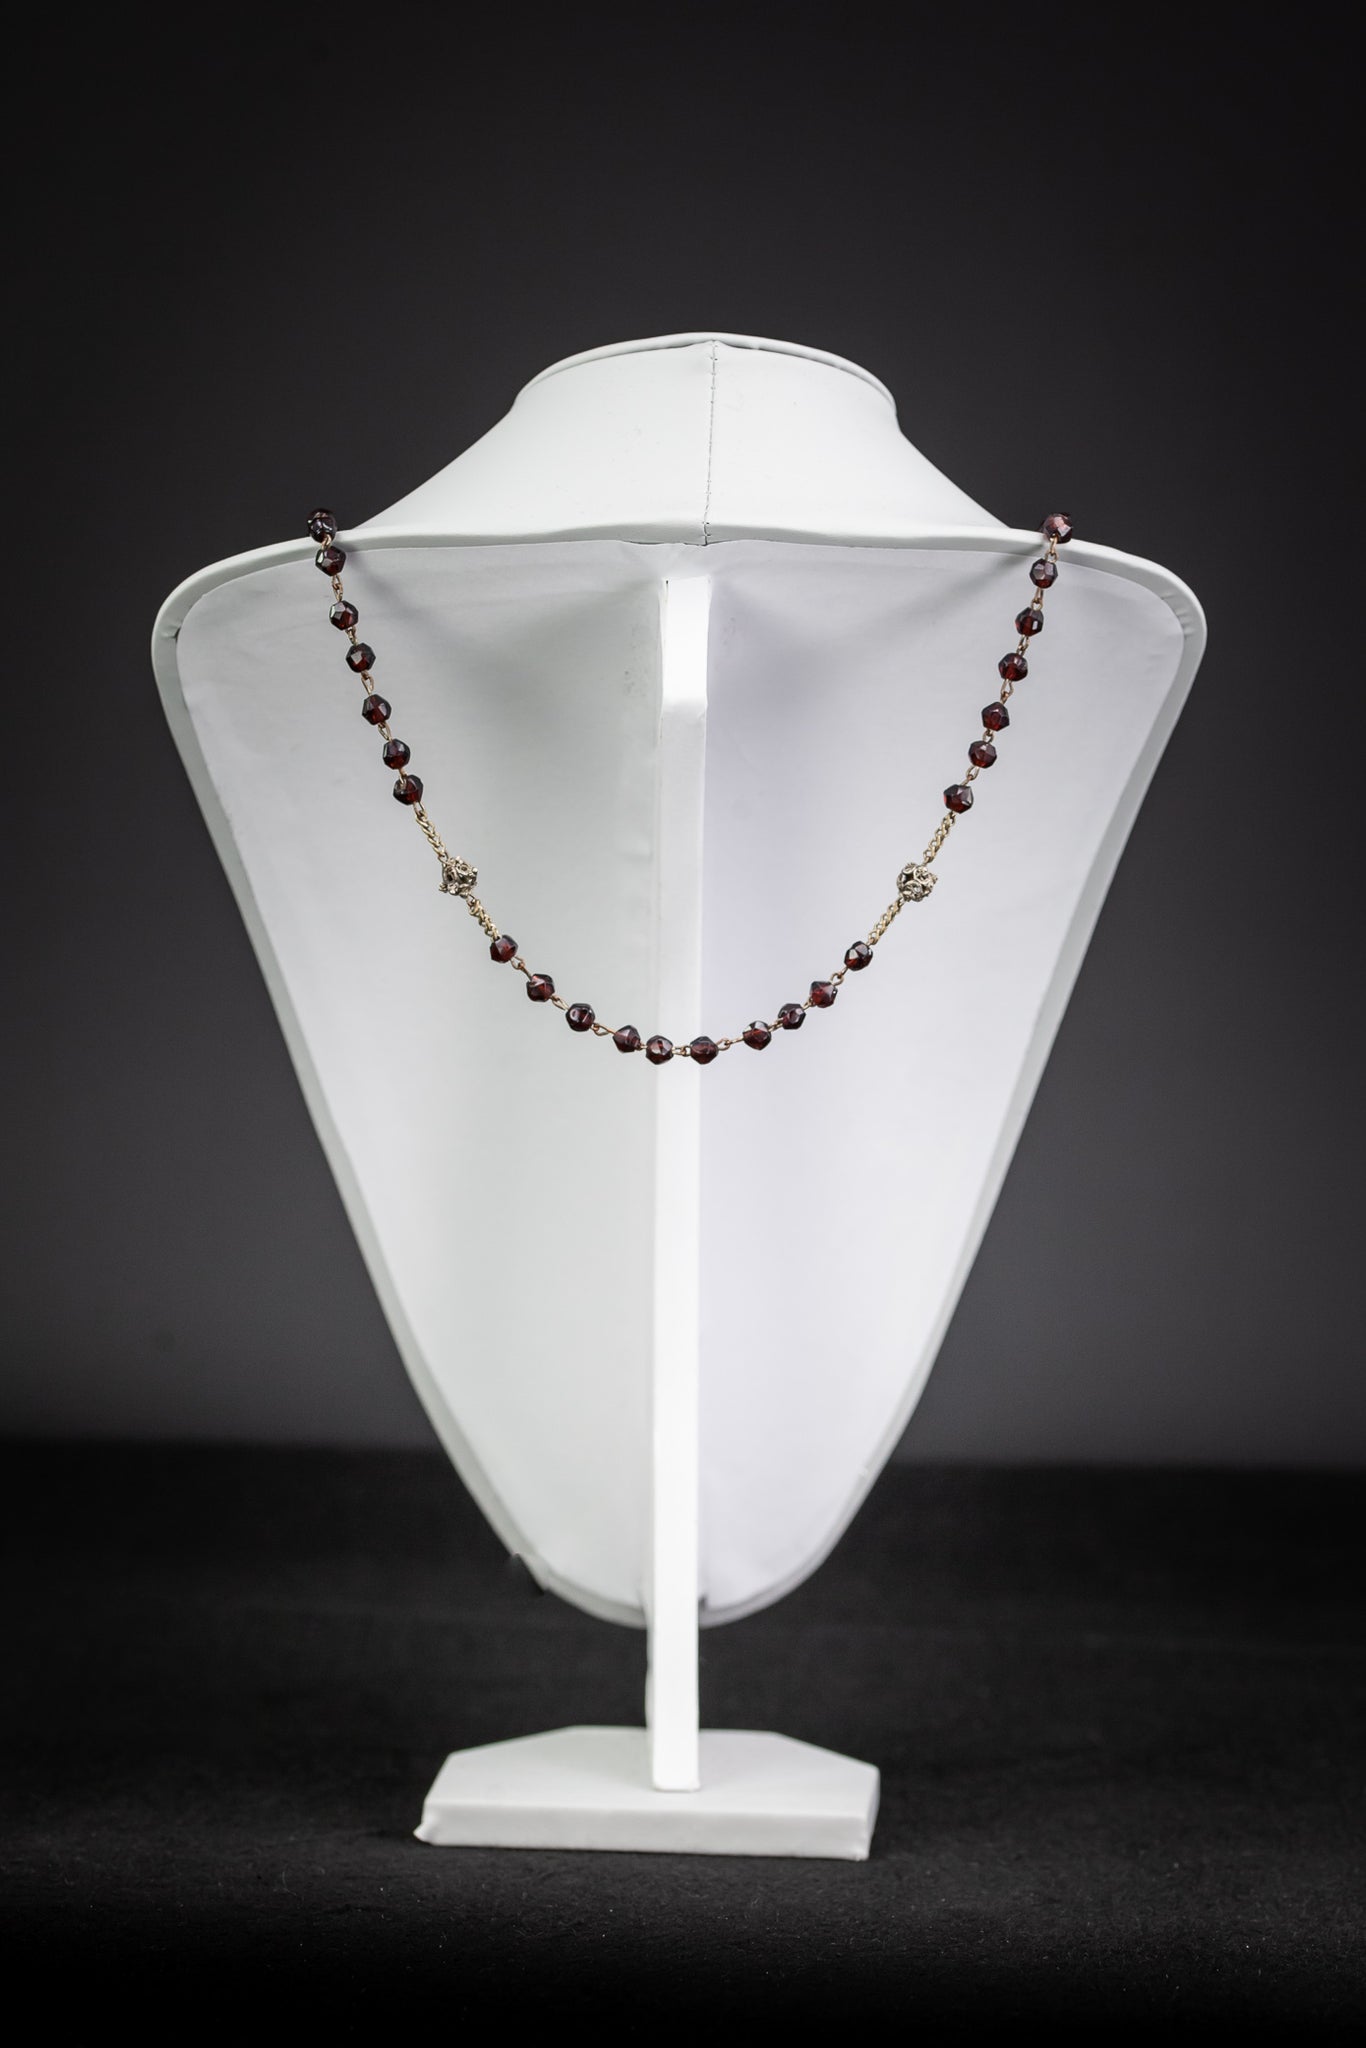 Rosary Solid Sterling Silver Red Garnets 20”